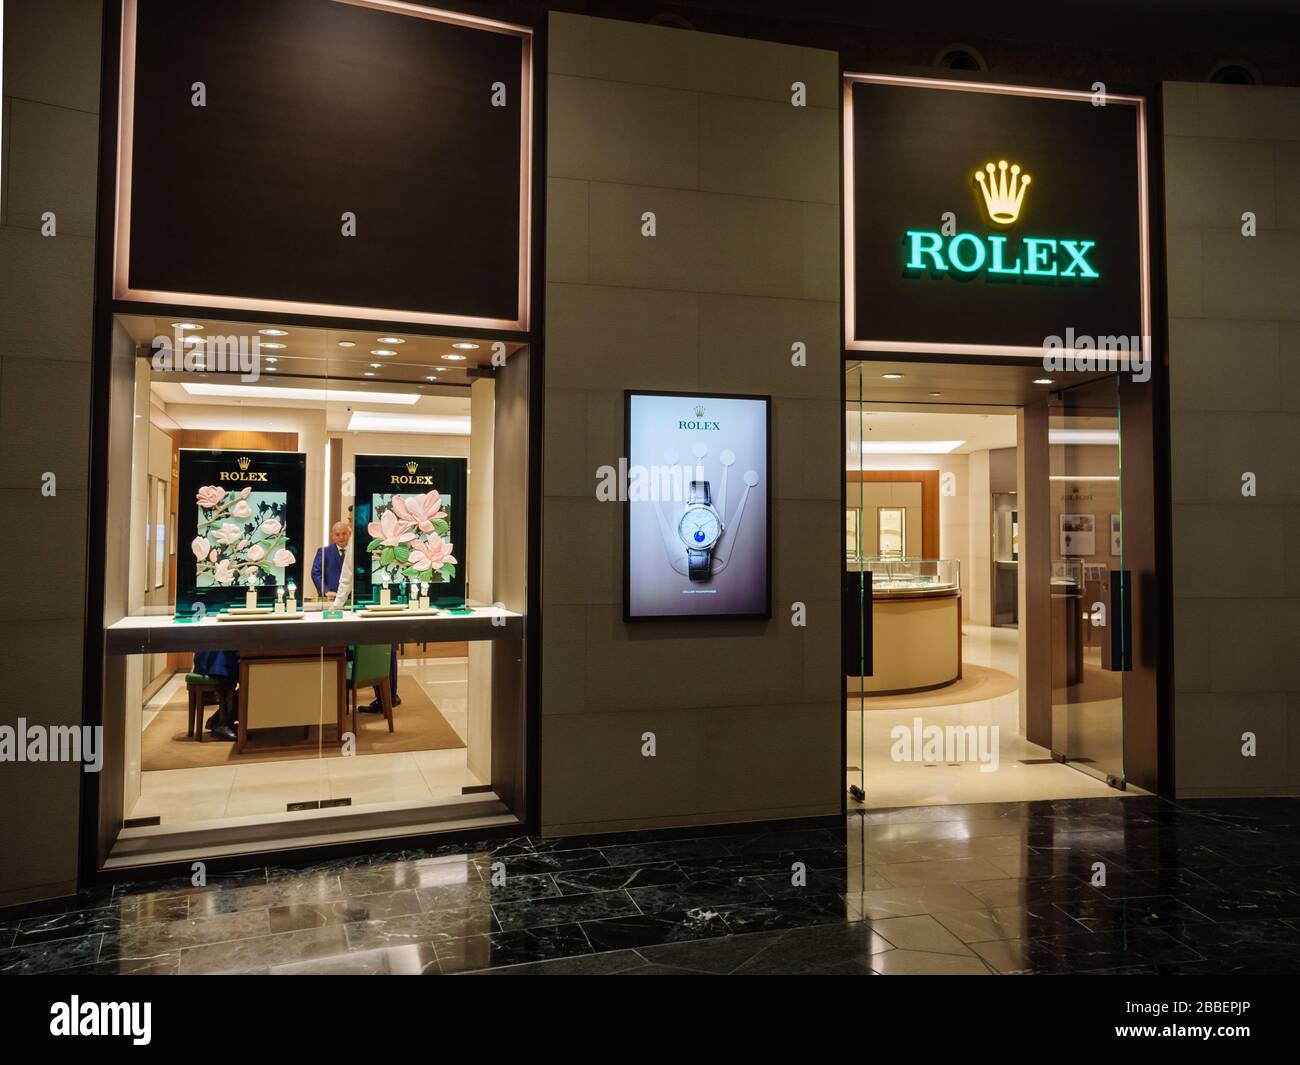 Page 2 - Rolex Boutique High Resolution Stock Photography and Images - Alamy